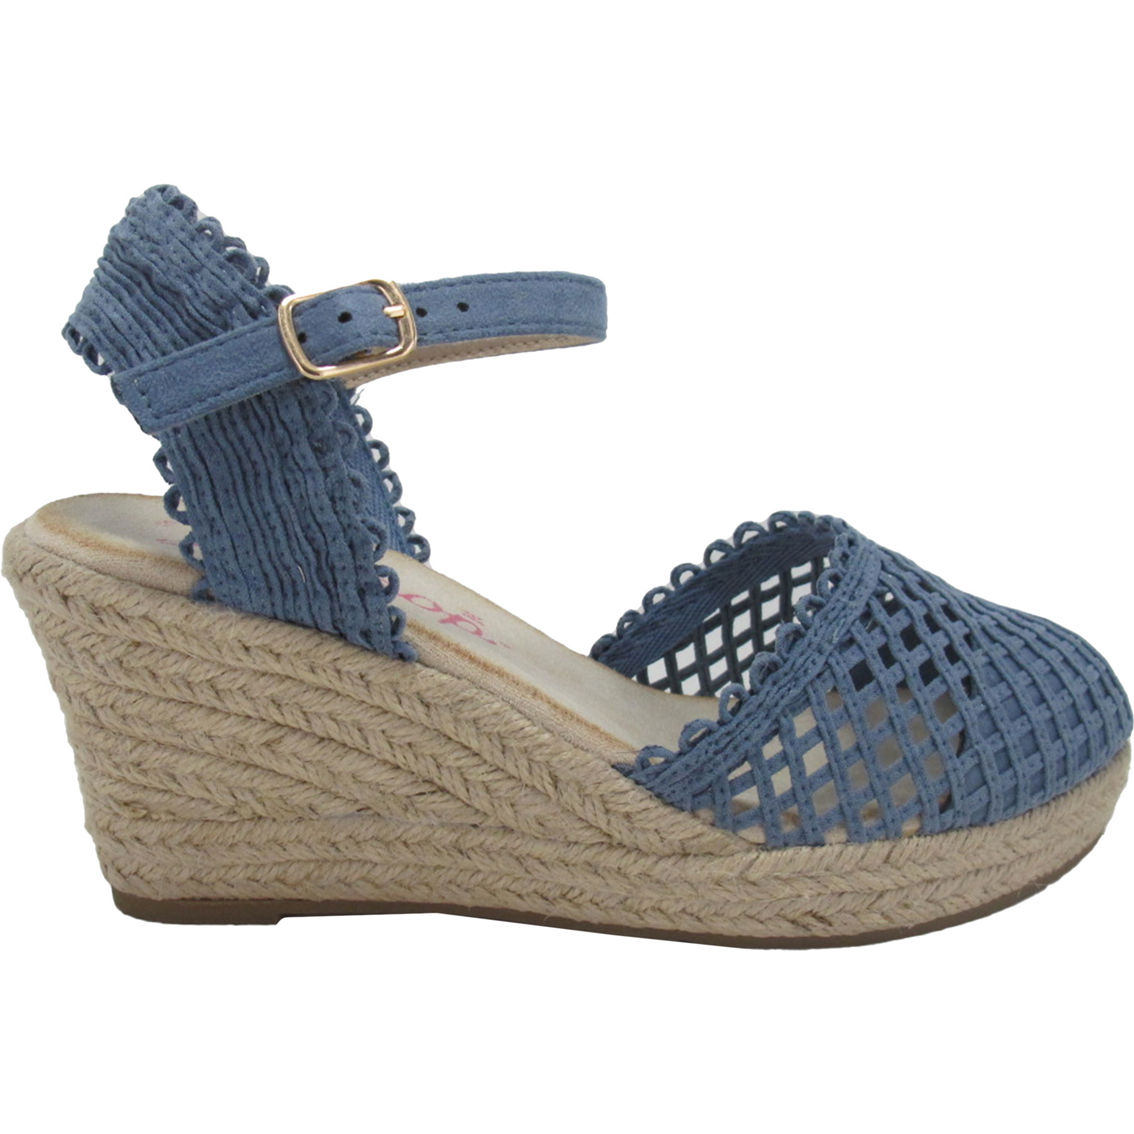 Jellypop Sharla Wedges - Image 2 of 6